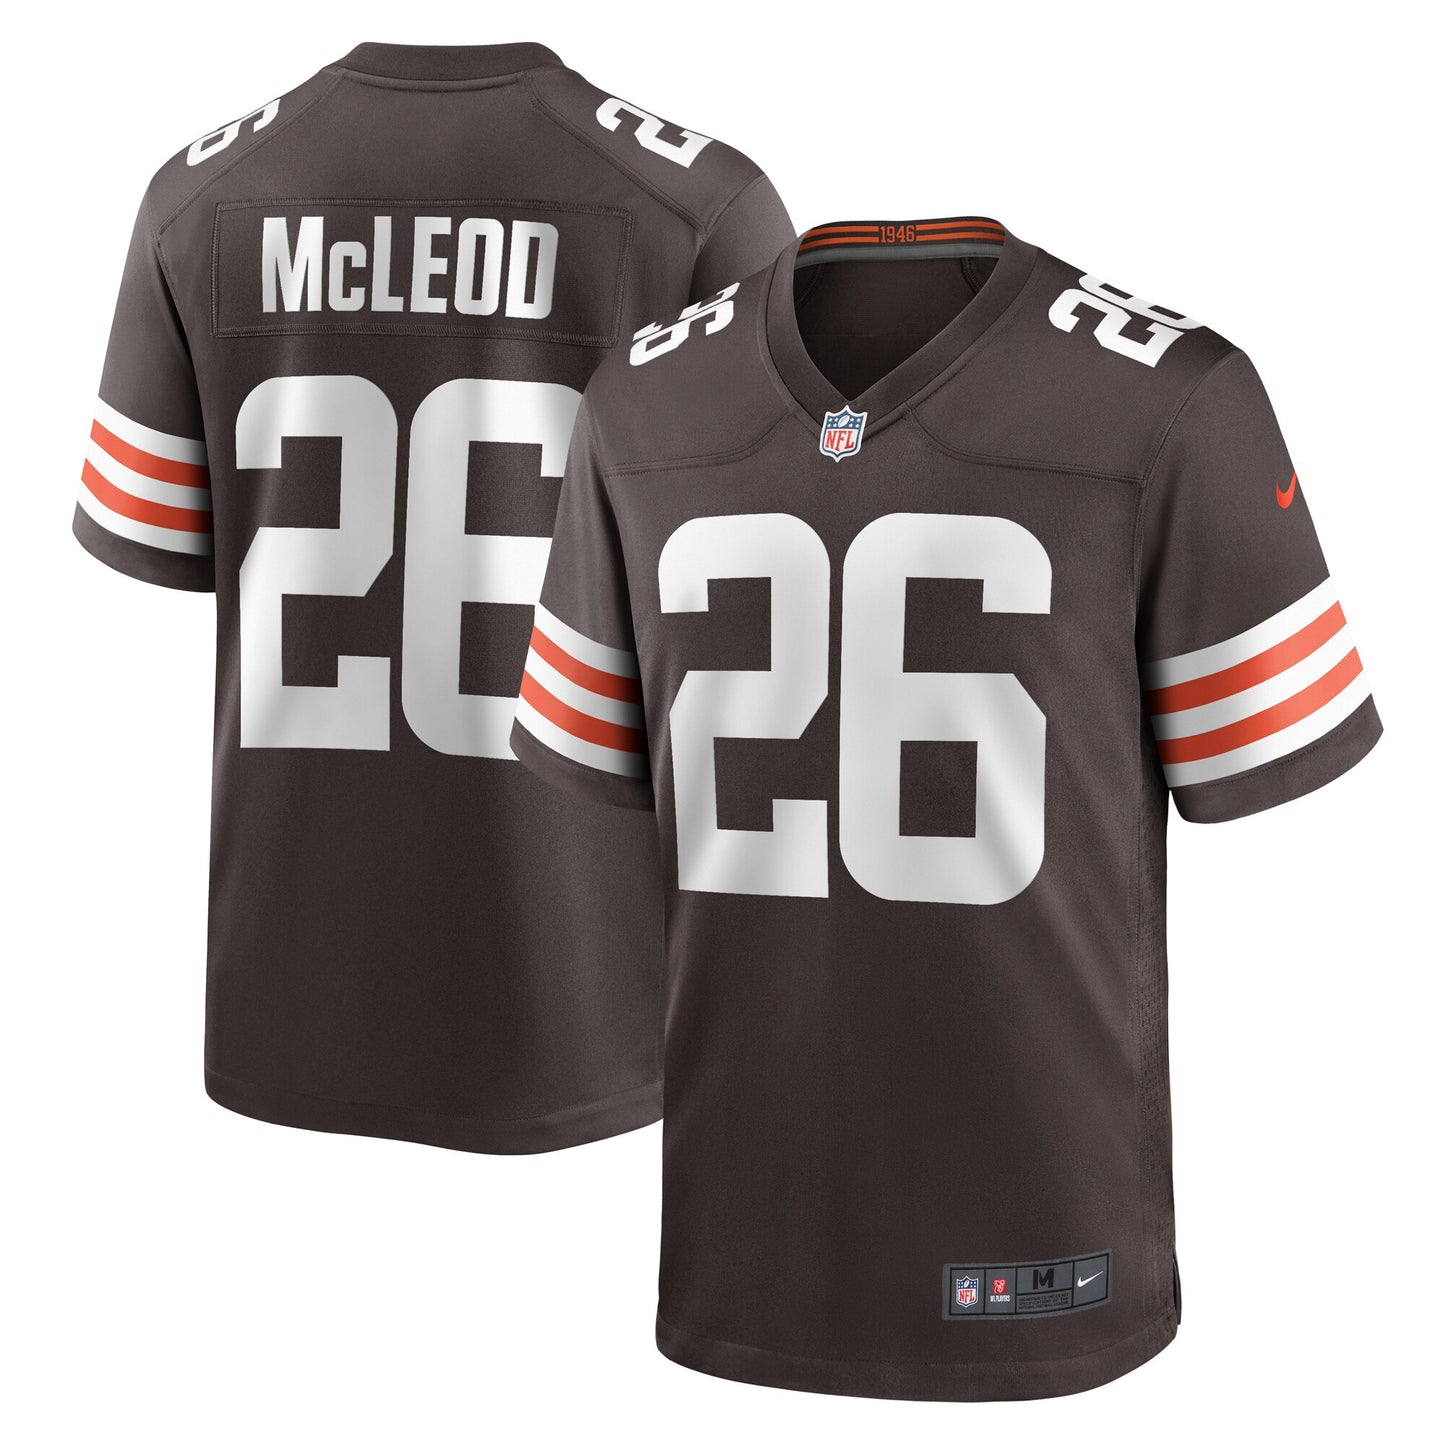 Rodney McLeod Cleveland Browns Nike Team Game Jersey - Brown